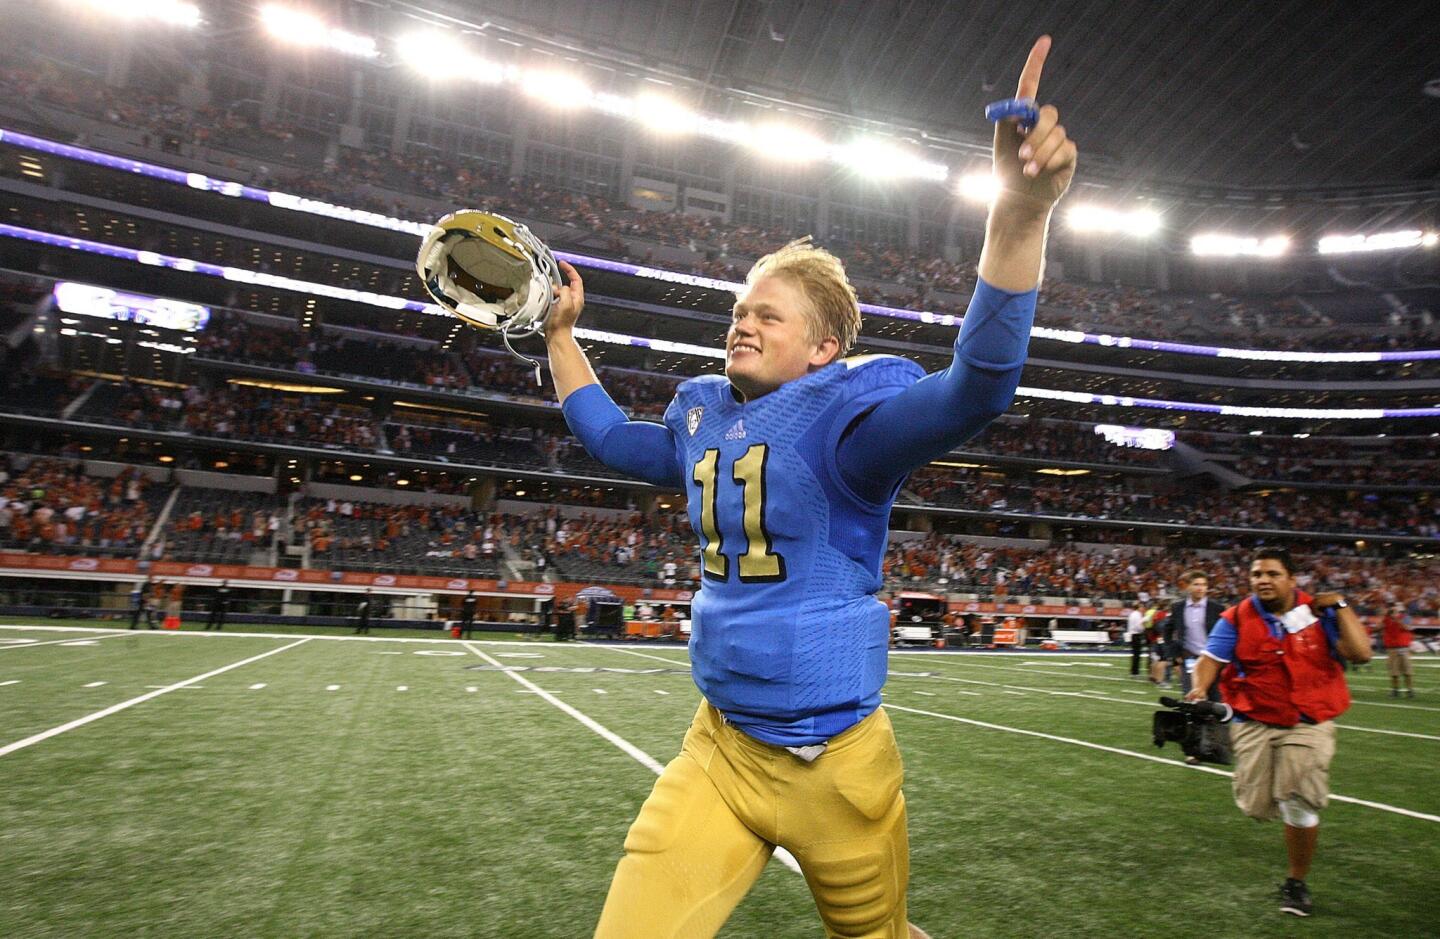 UCLA backup quarterback Jerry Neuheisel completed 23 of 30 passes for 178 yards and two touchdowns in the Bruins' 20-17 win over Texas.